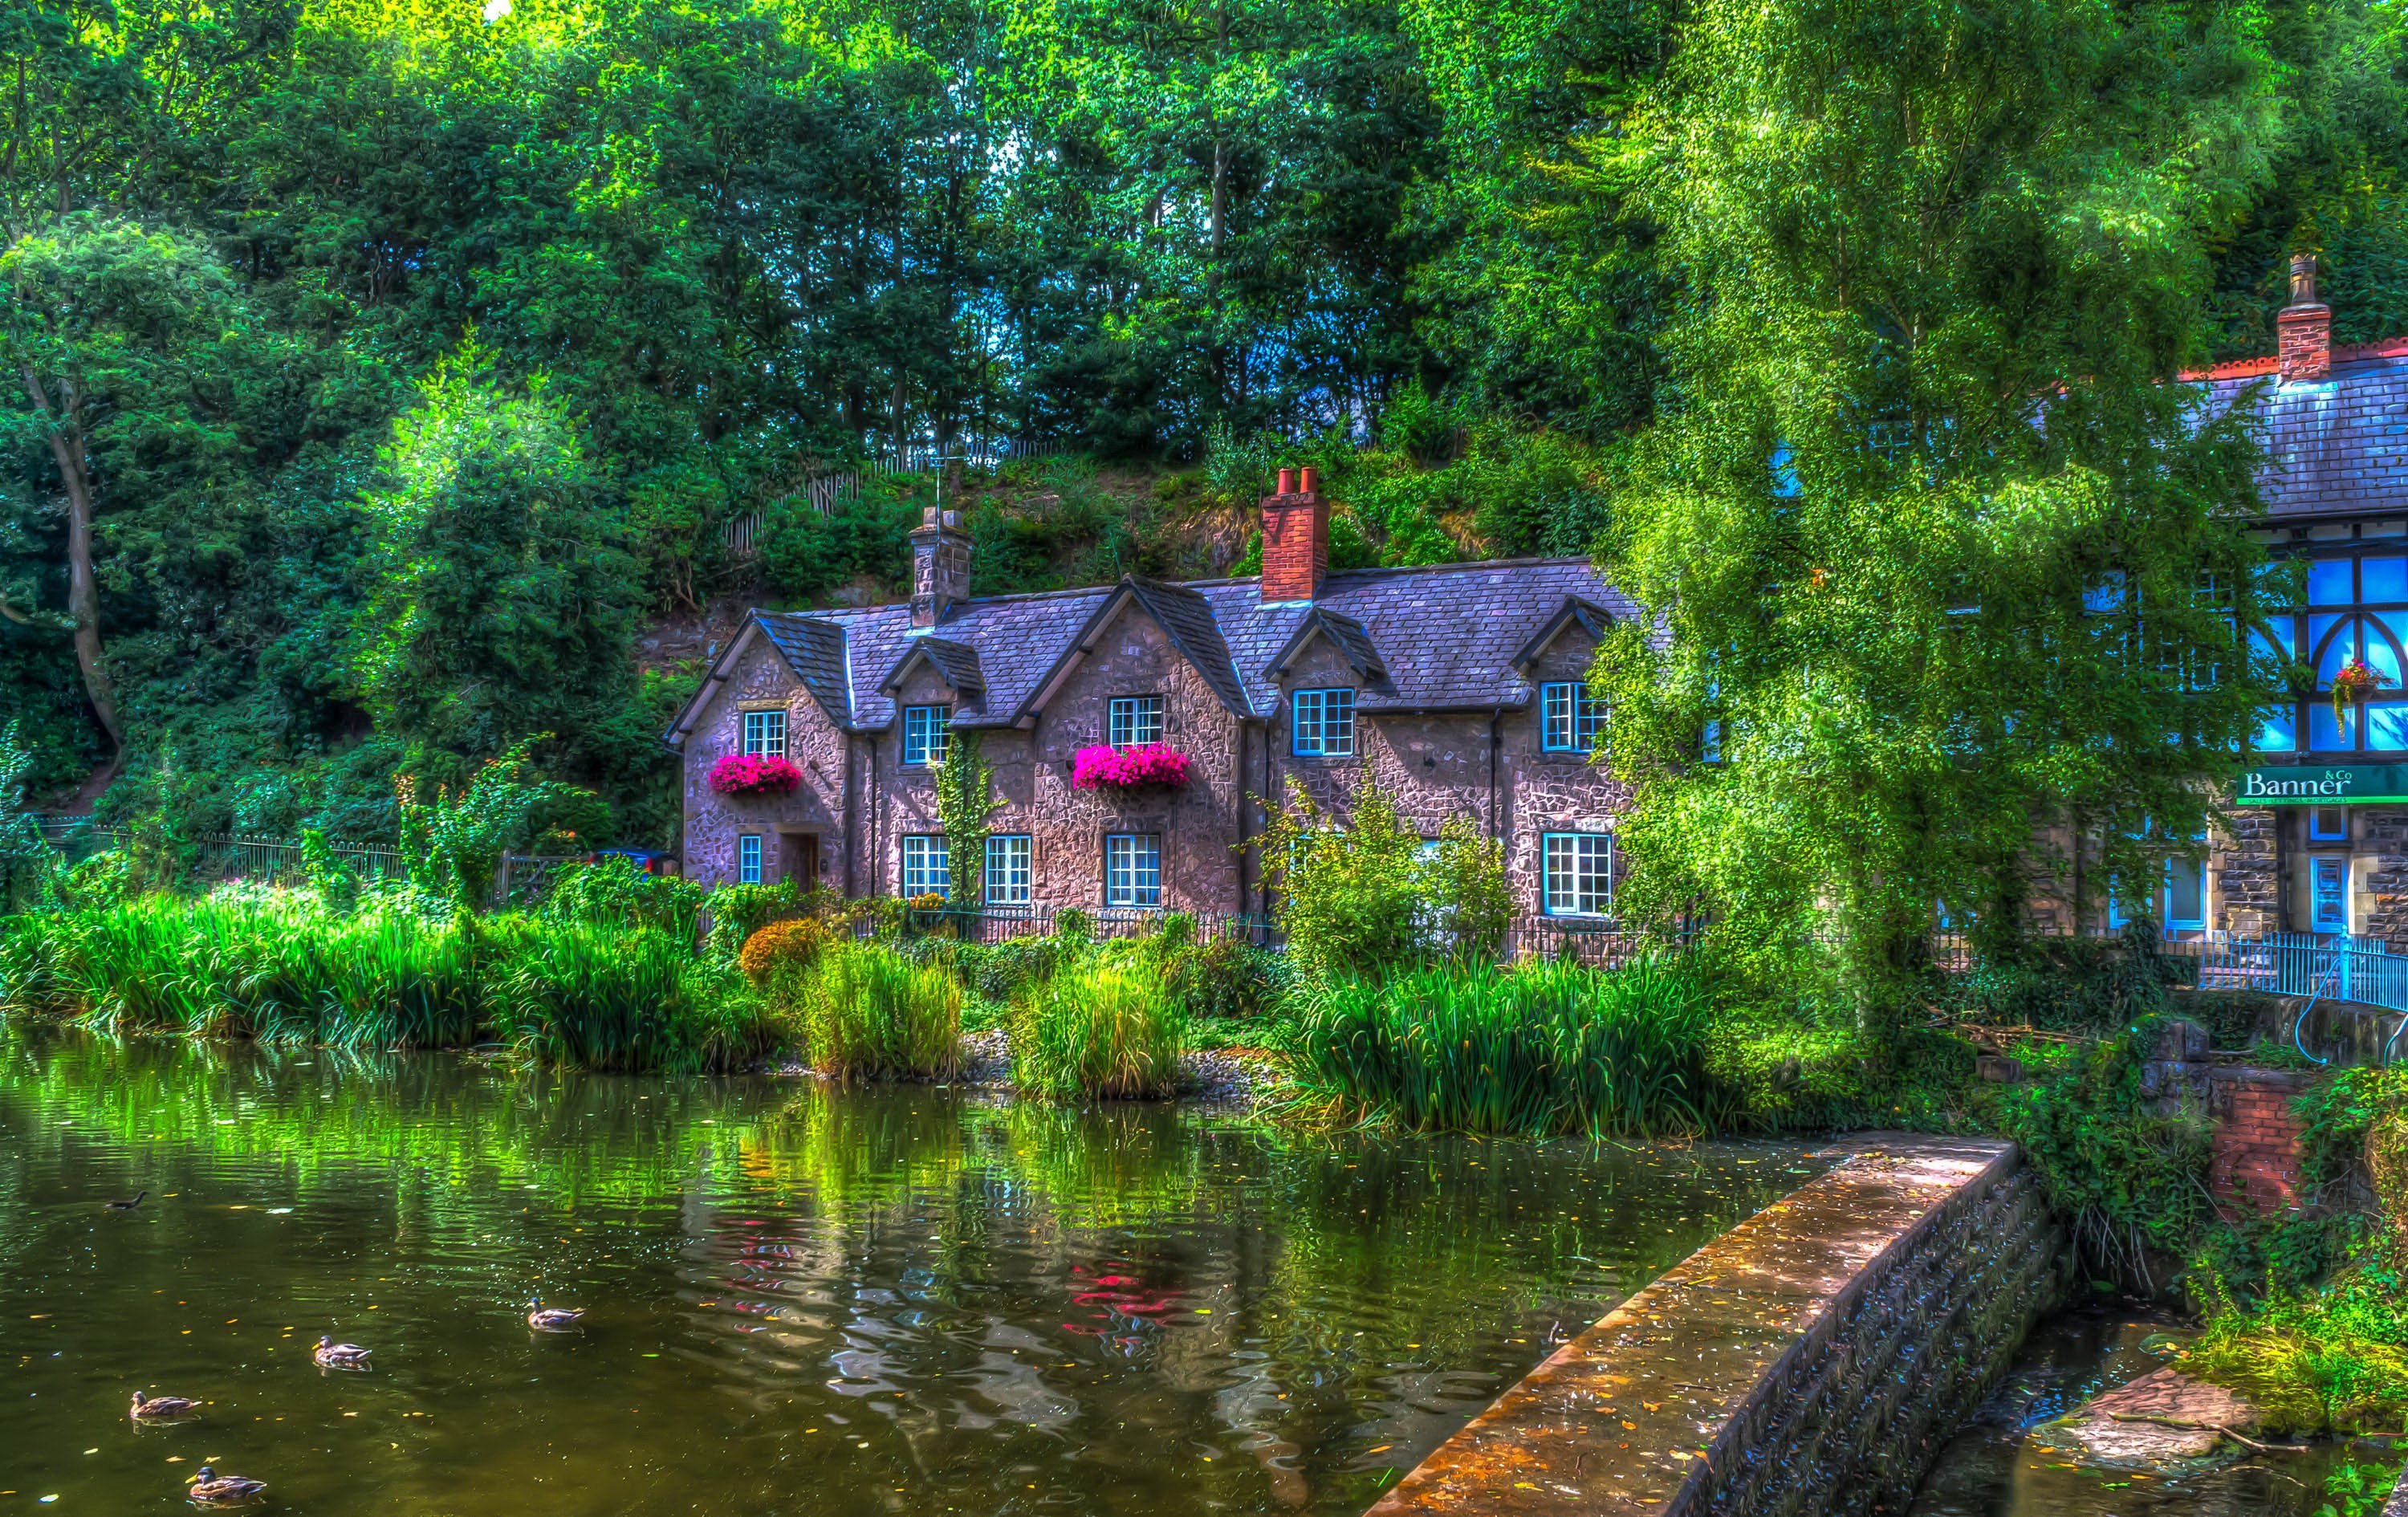 england, Houses, Pond, Ducks, Summer, Hdr, Trees, Lymm, Cities Wallpaper